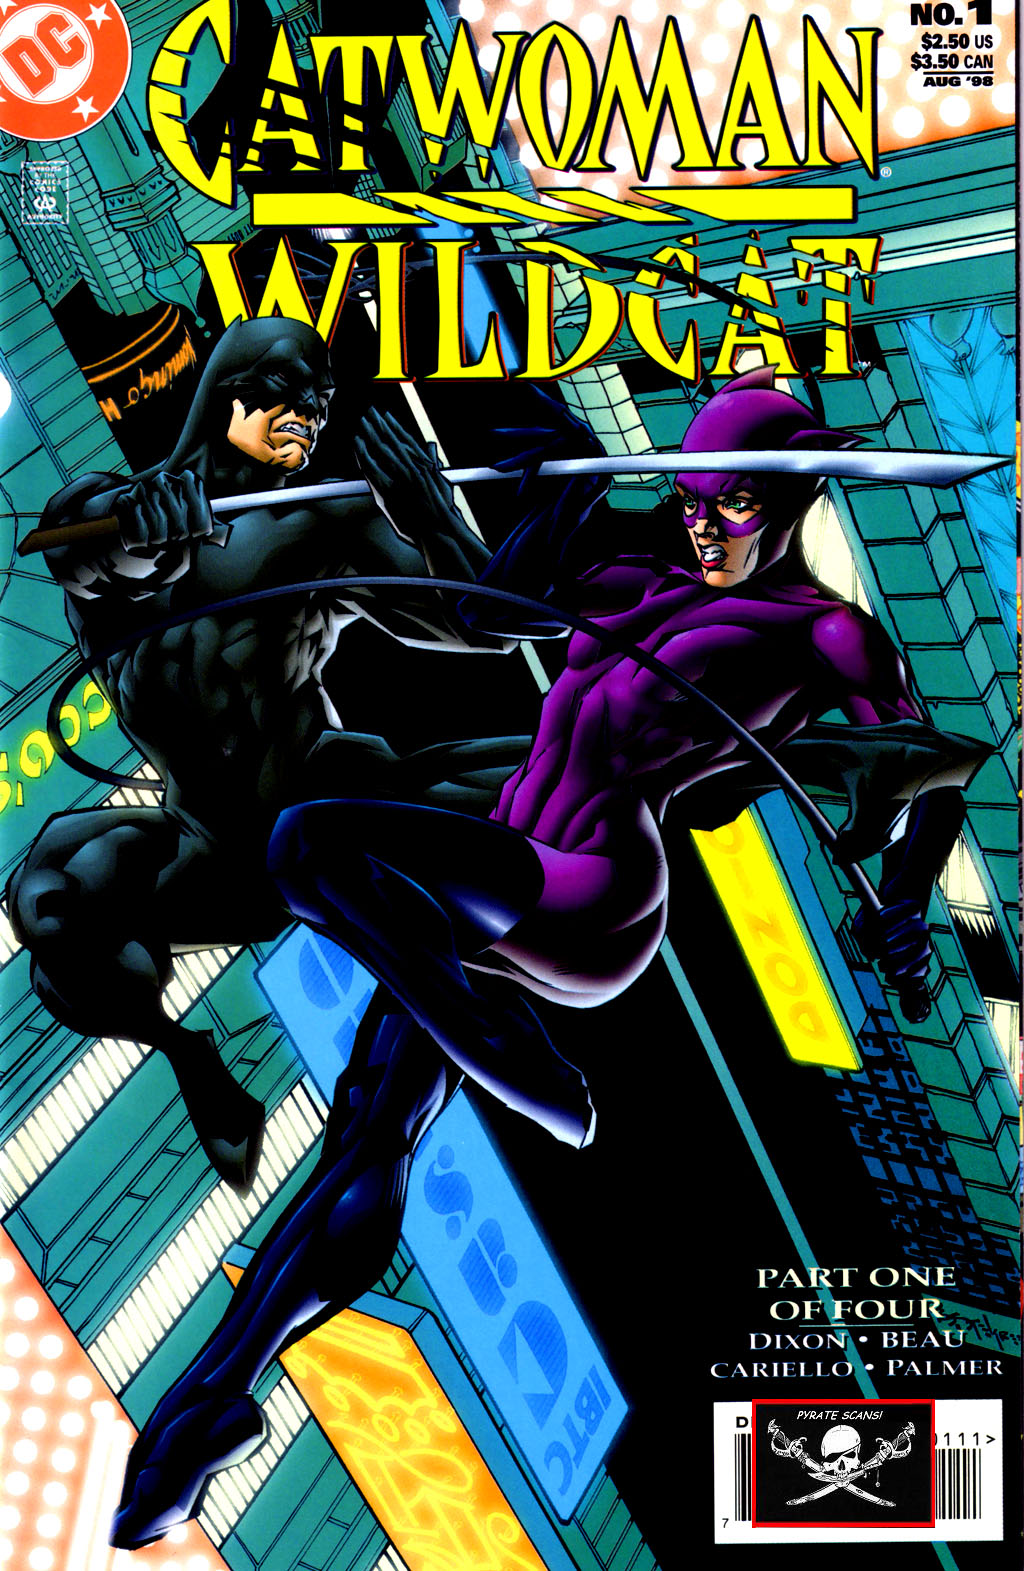 Read online Catwoman/Wildcat comic -  Issue #1 - 1